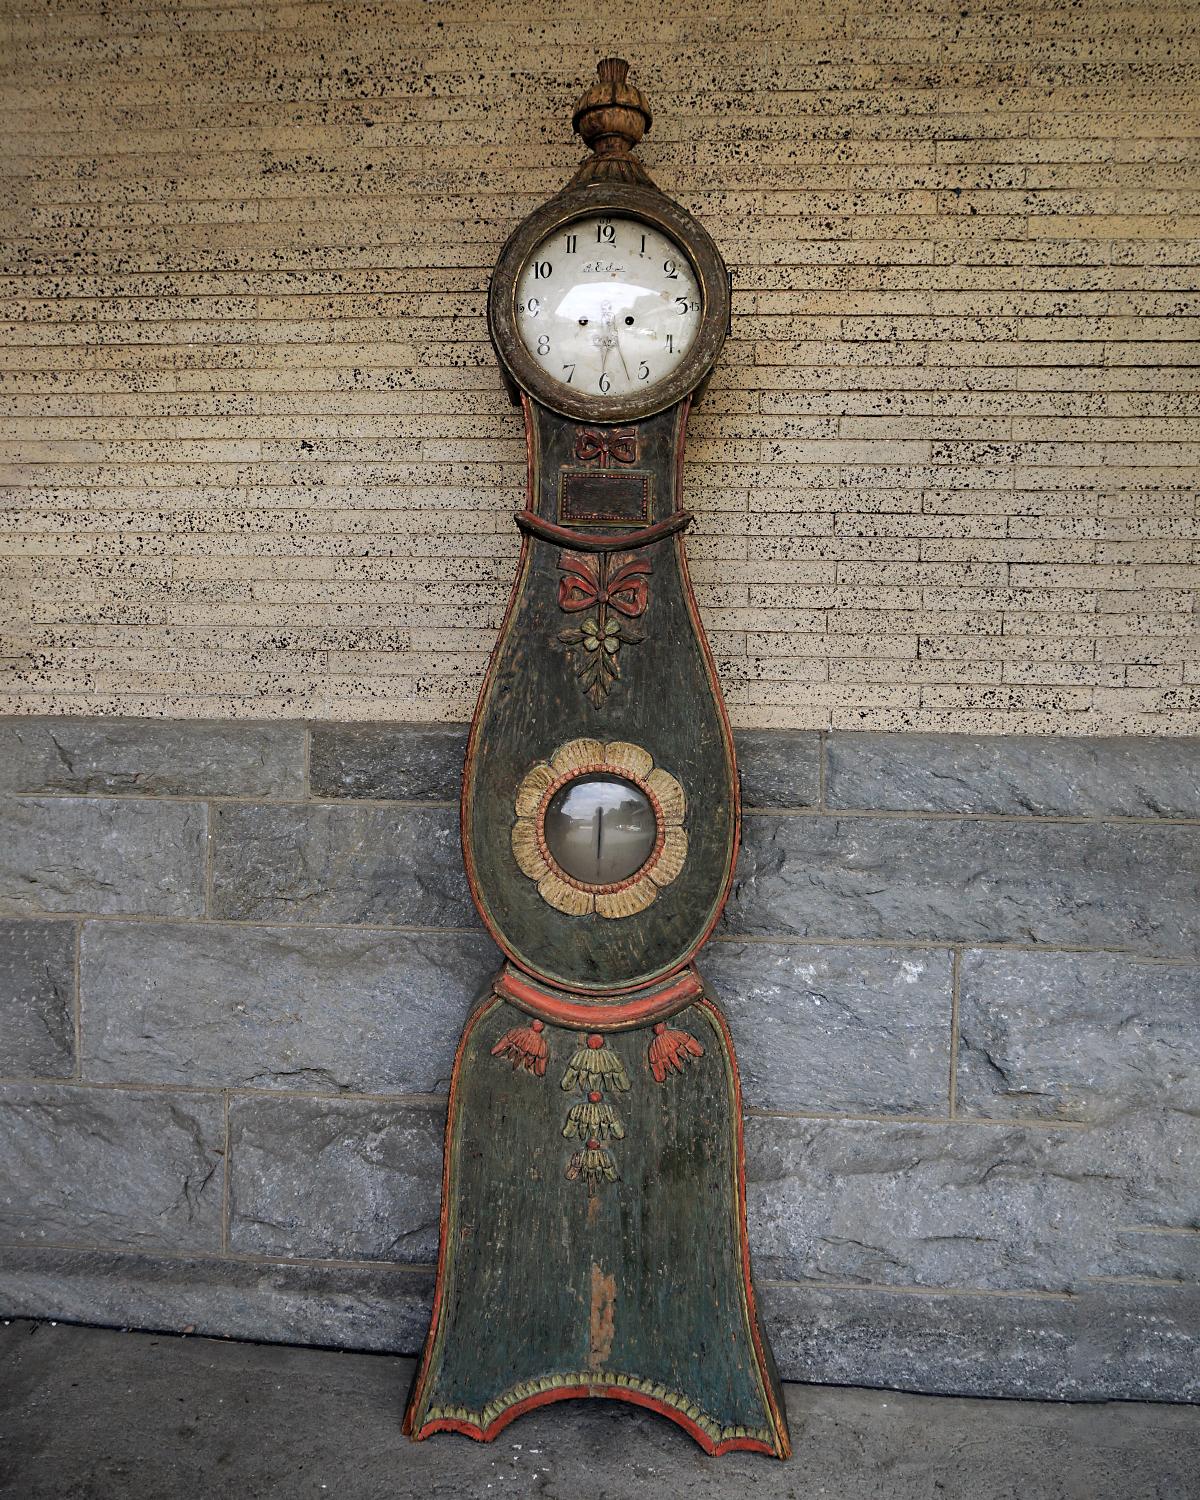 Swedish tall case clock in original decorative paint. The original works with signed dial are from the village of Mora and were probably carried back to Ljusdal where the case was made. The bonnet is topped with a carved urn finial, and the body